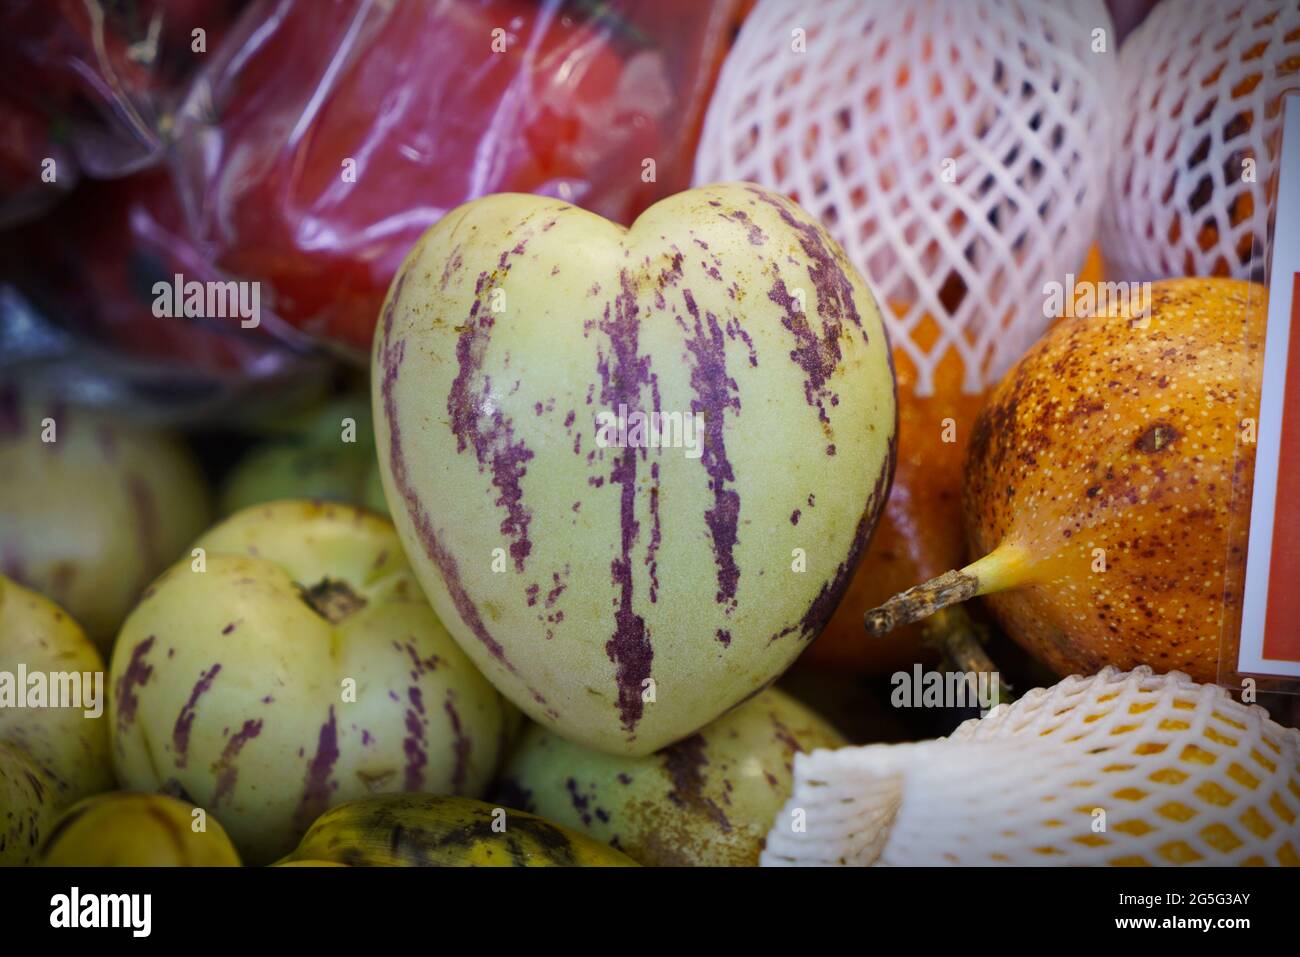 Heart-shaped fruit, native to South America, is called pepino dulce - sweet cucumber - or even just pear melon. Stock Photo